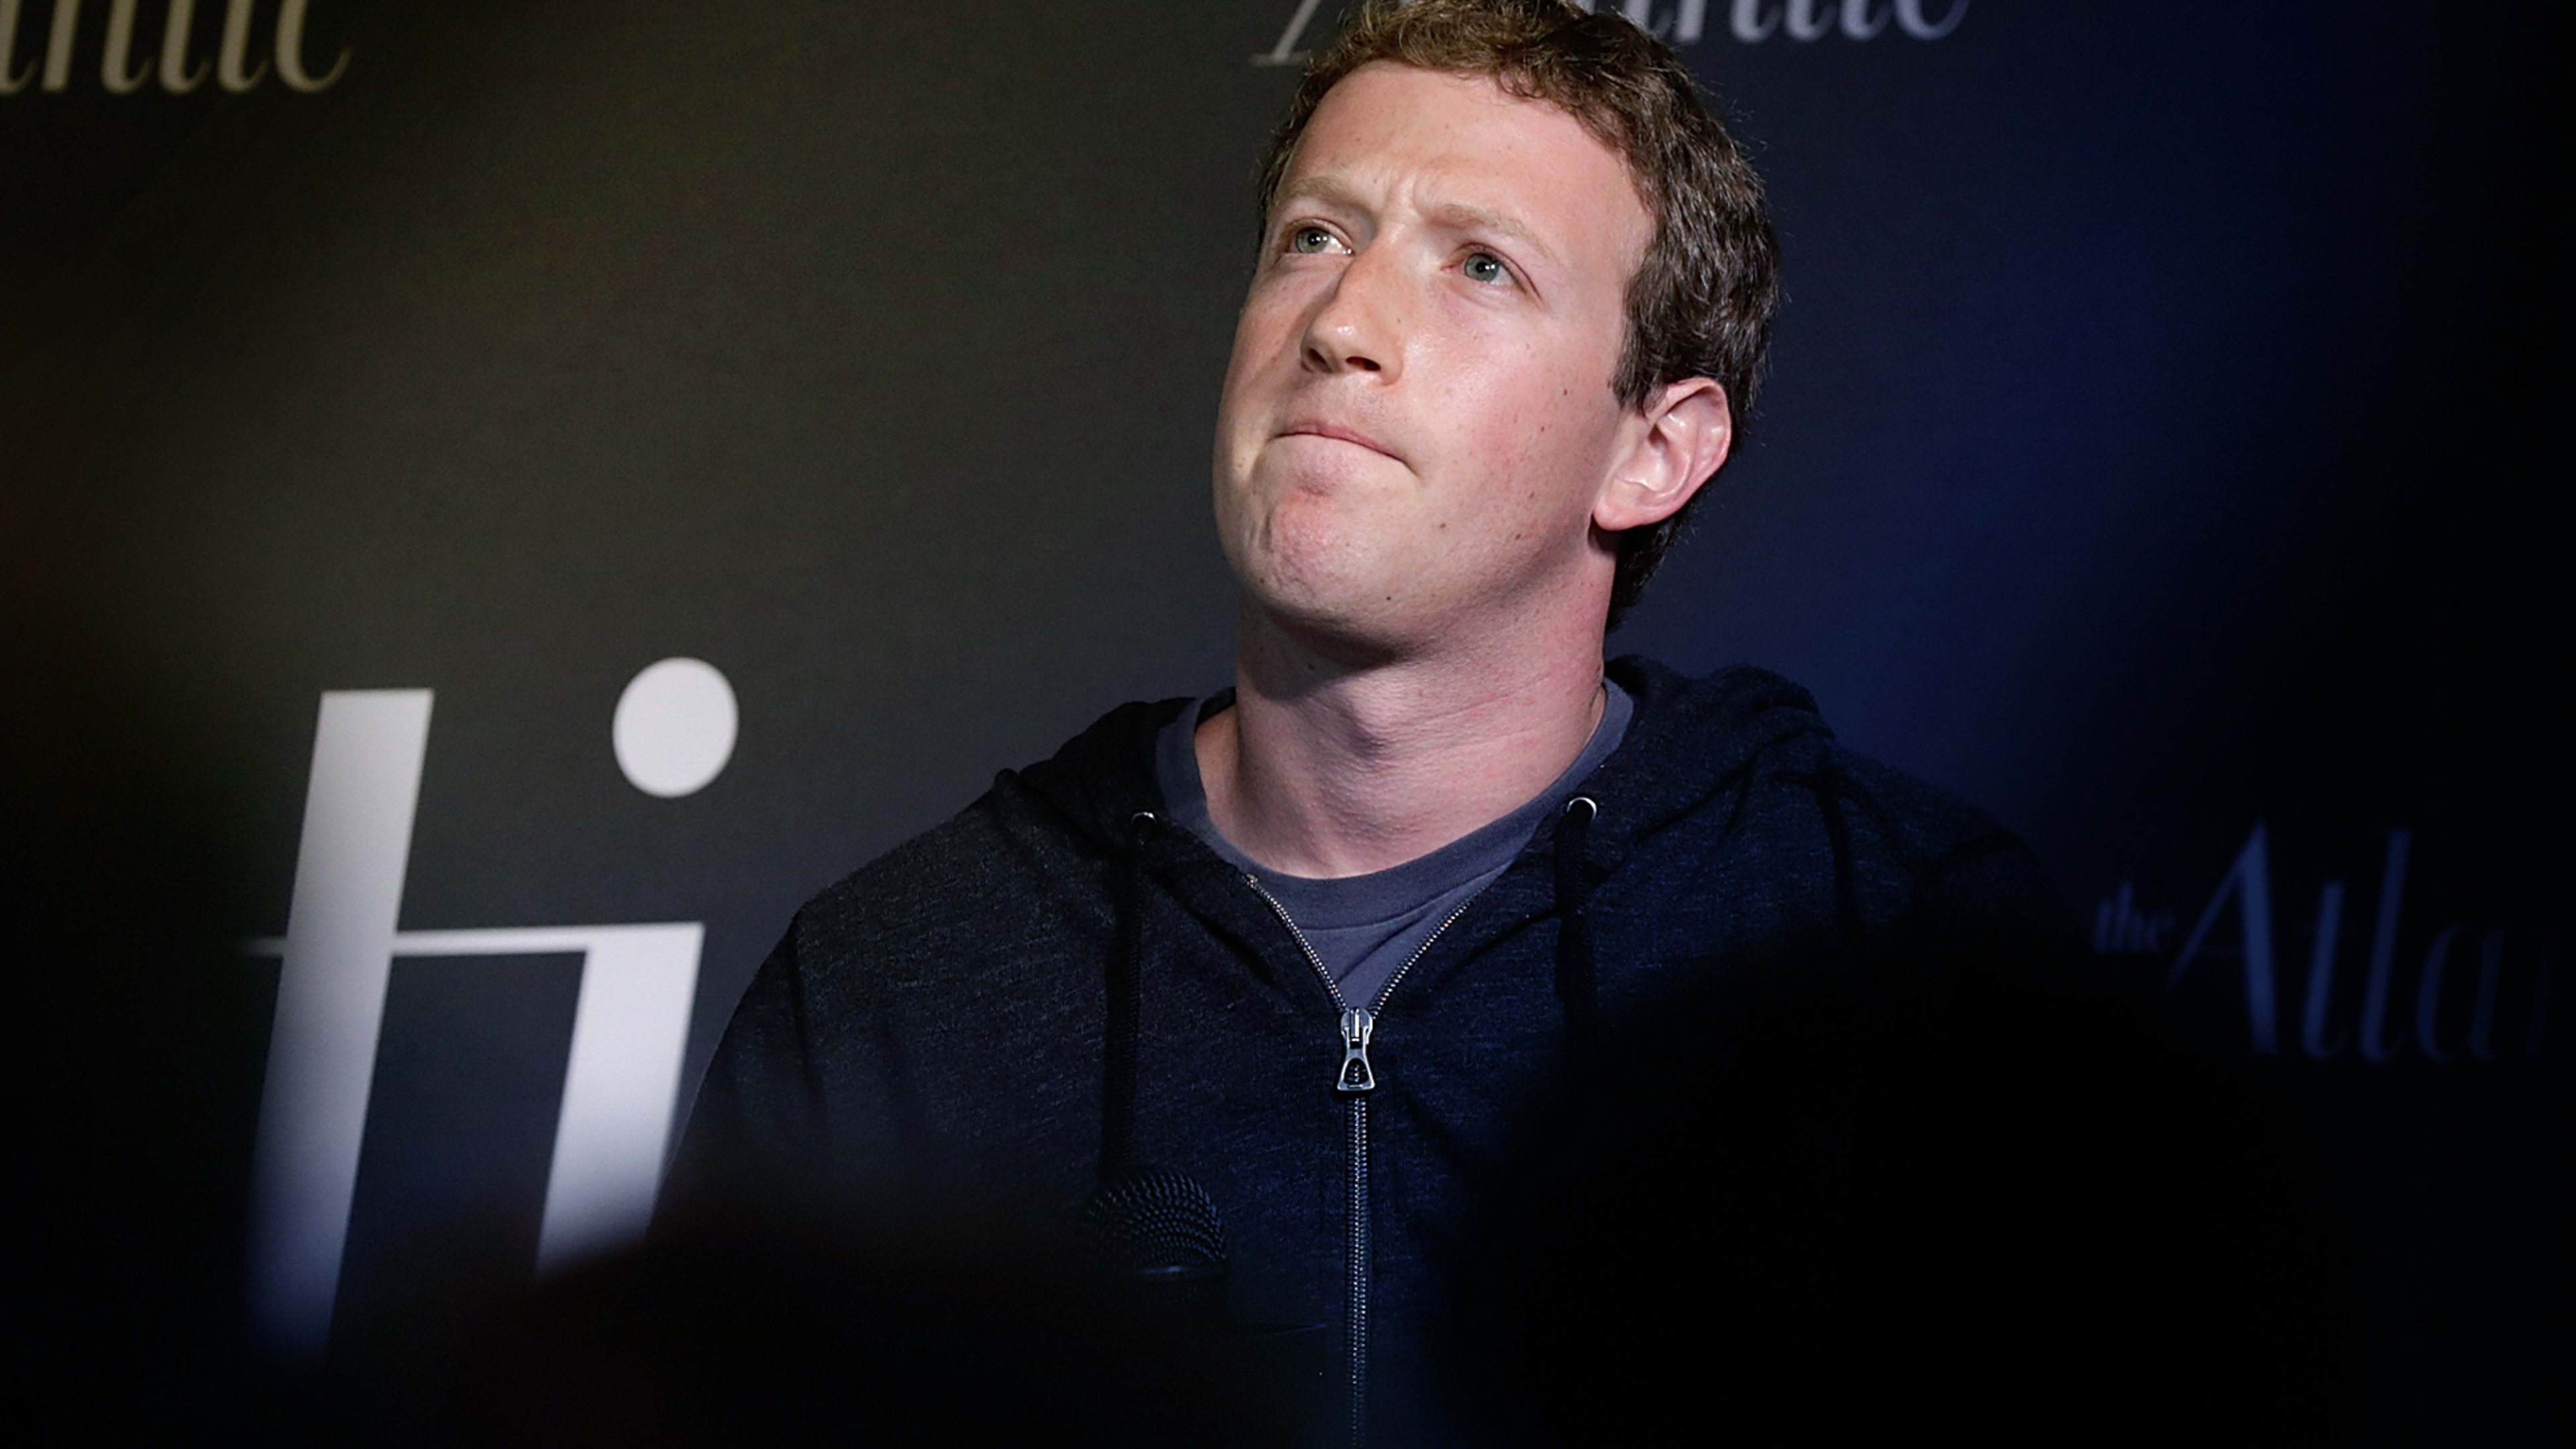 Exclusive: Facebook’s leadership sinks over 20 points in corporate reputation poll